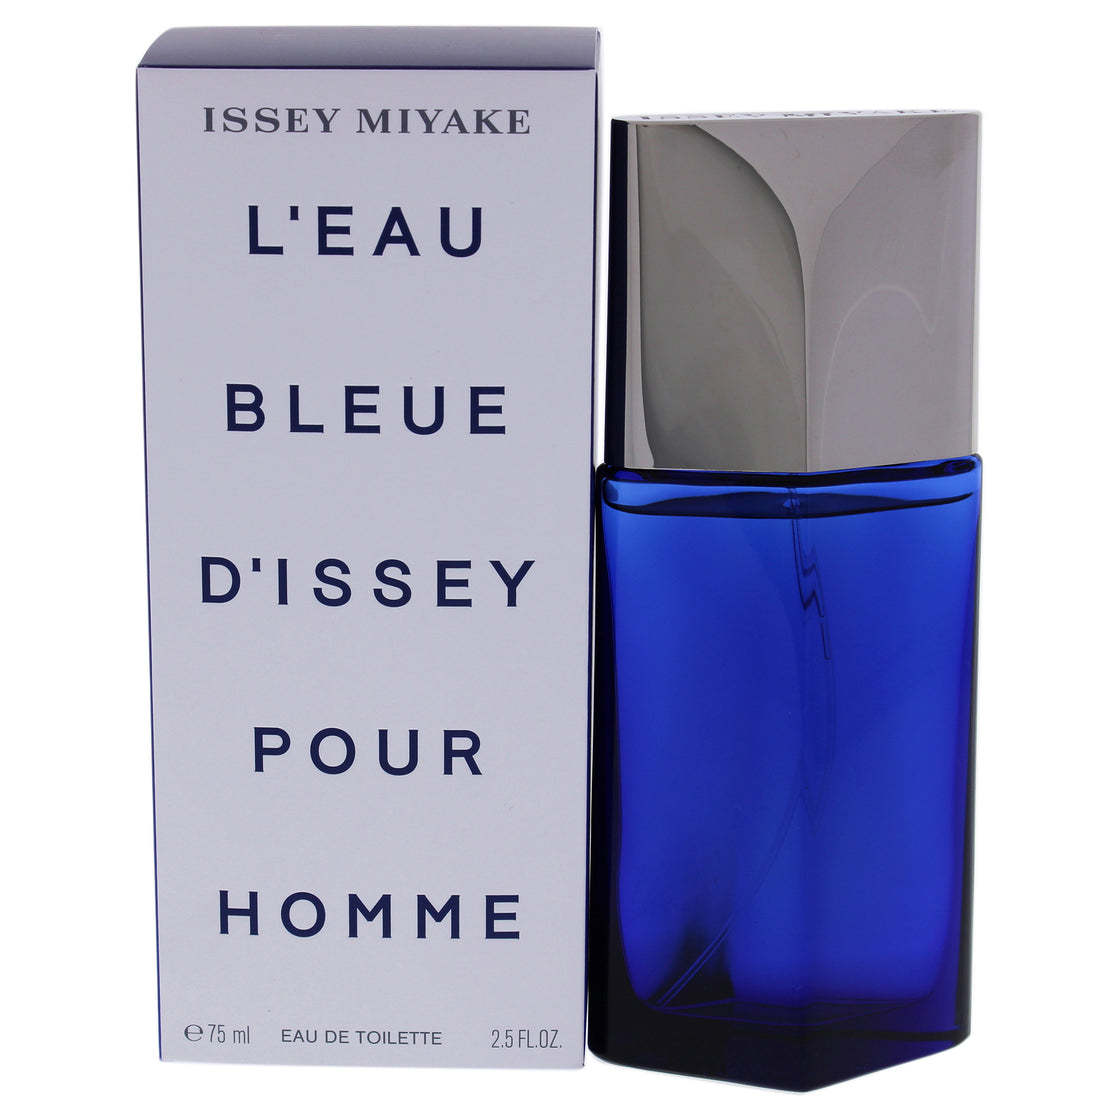 Leau Bleue Dissey Pour Homme by Issey Miyake for Men - 2.5 oz EDT Spray